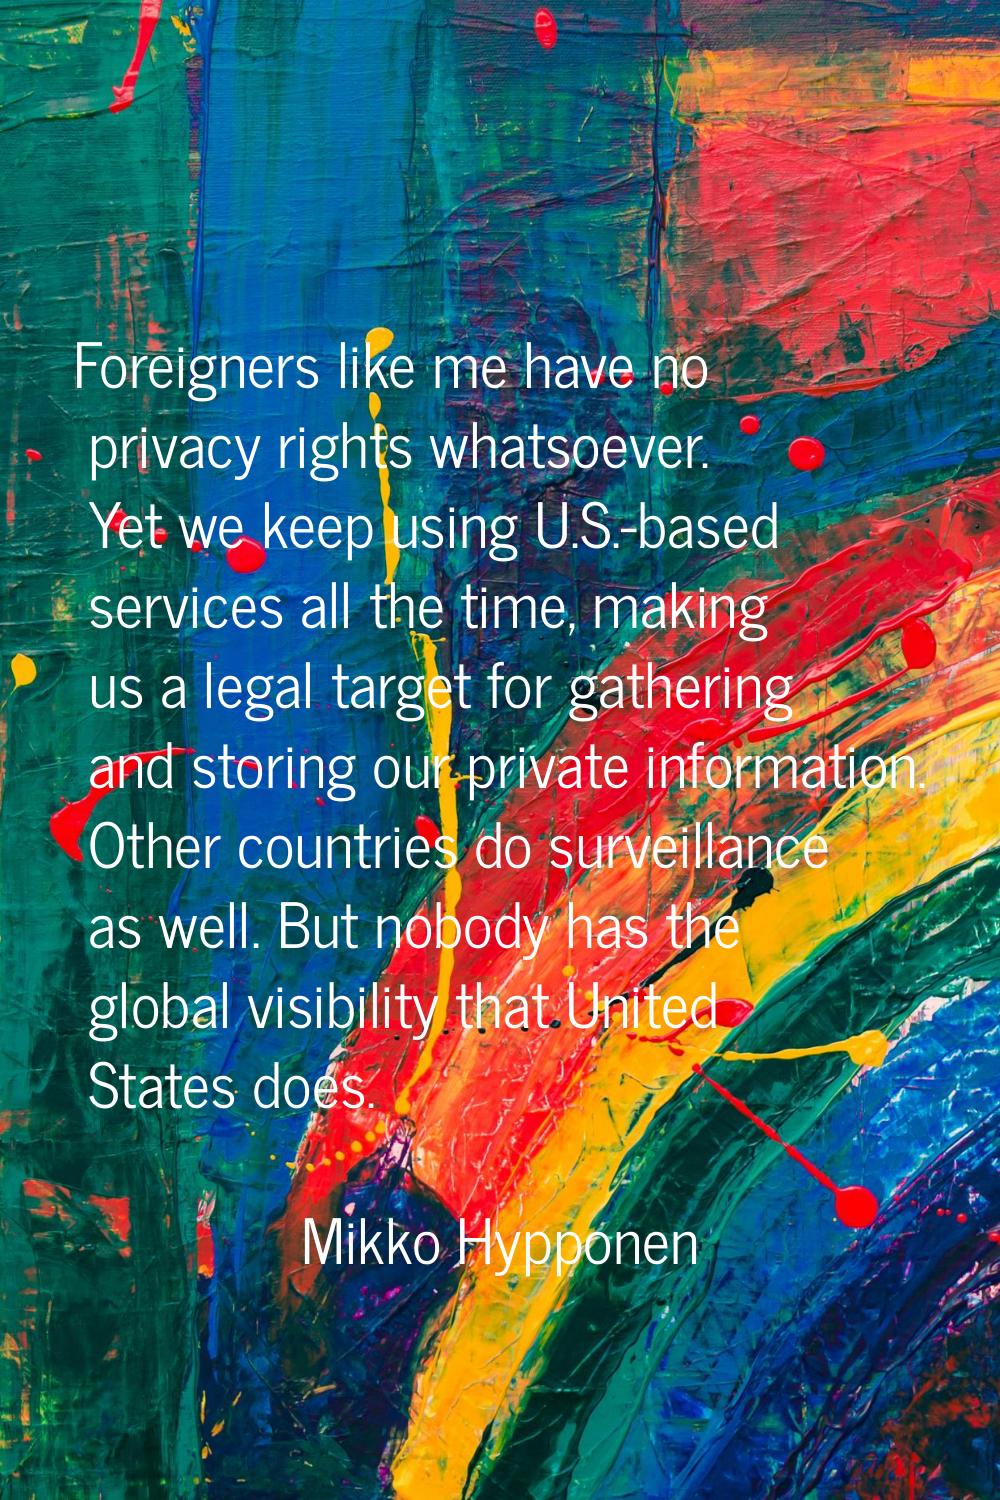 Foreigners like me have no privacy rights whatsoever. Yet we keep using U.S.-based services all the